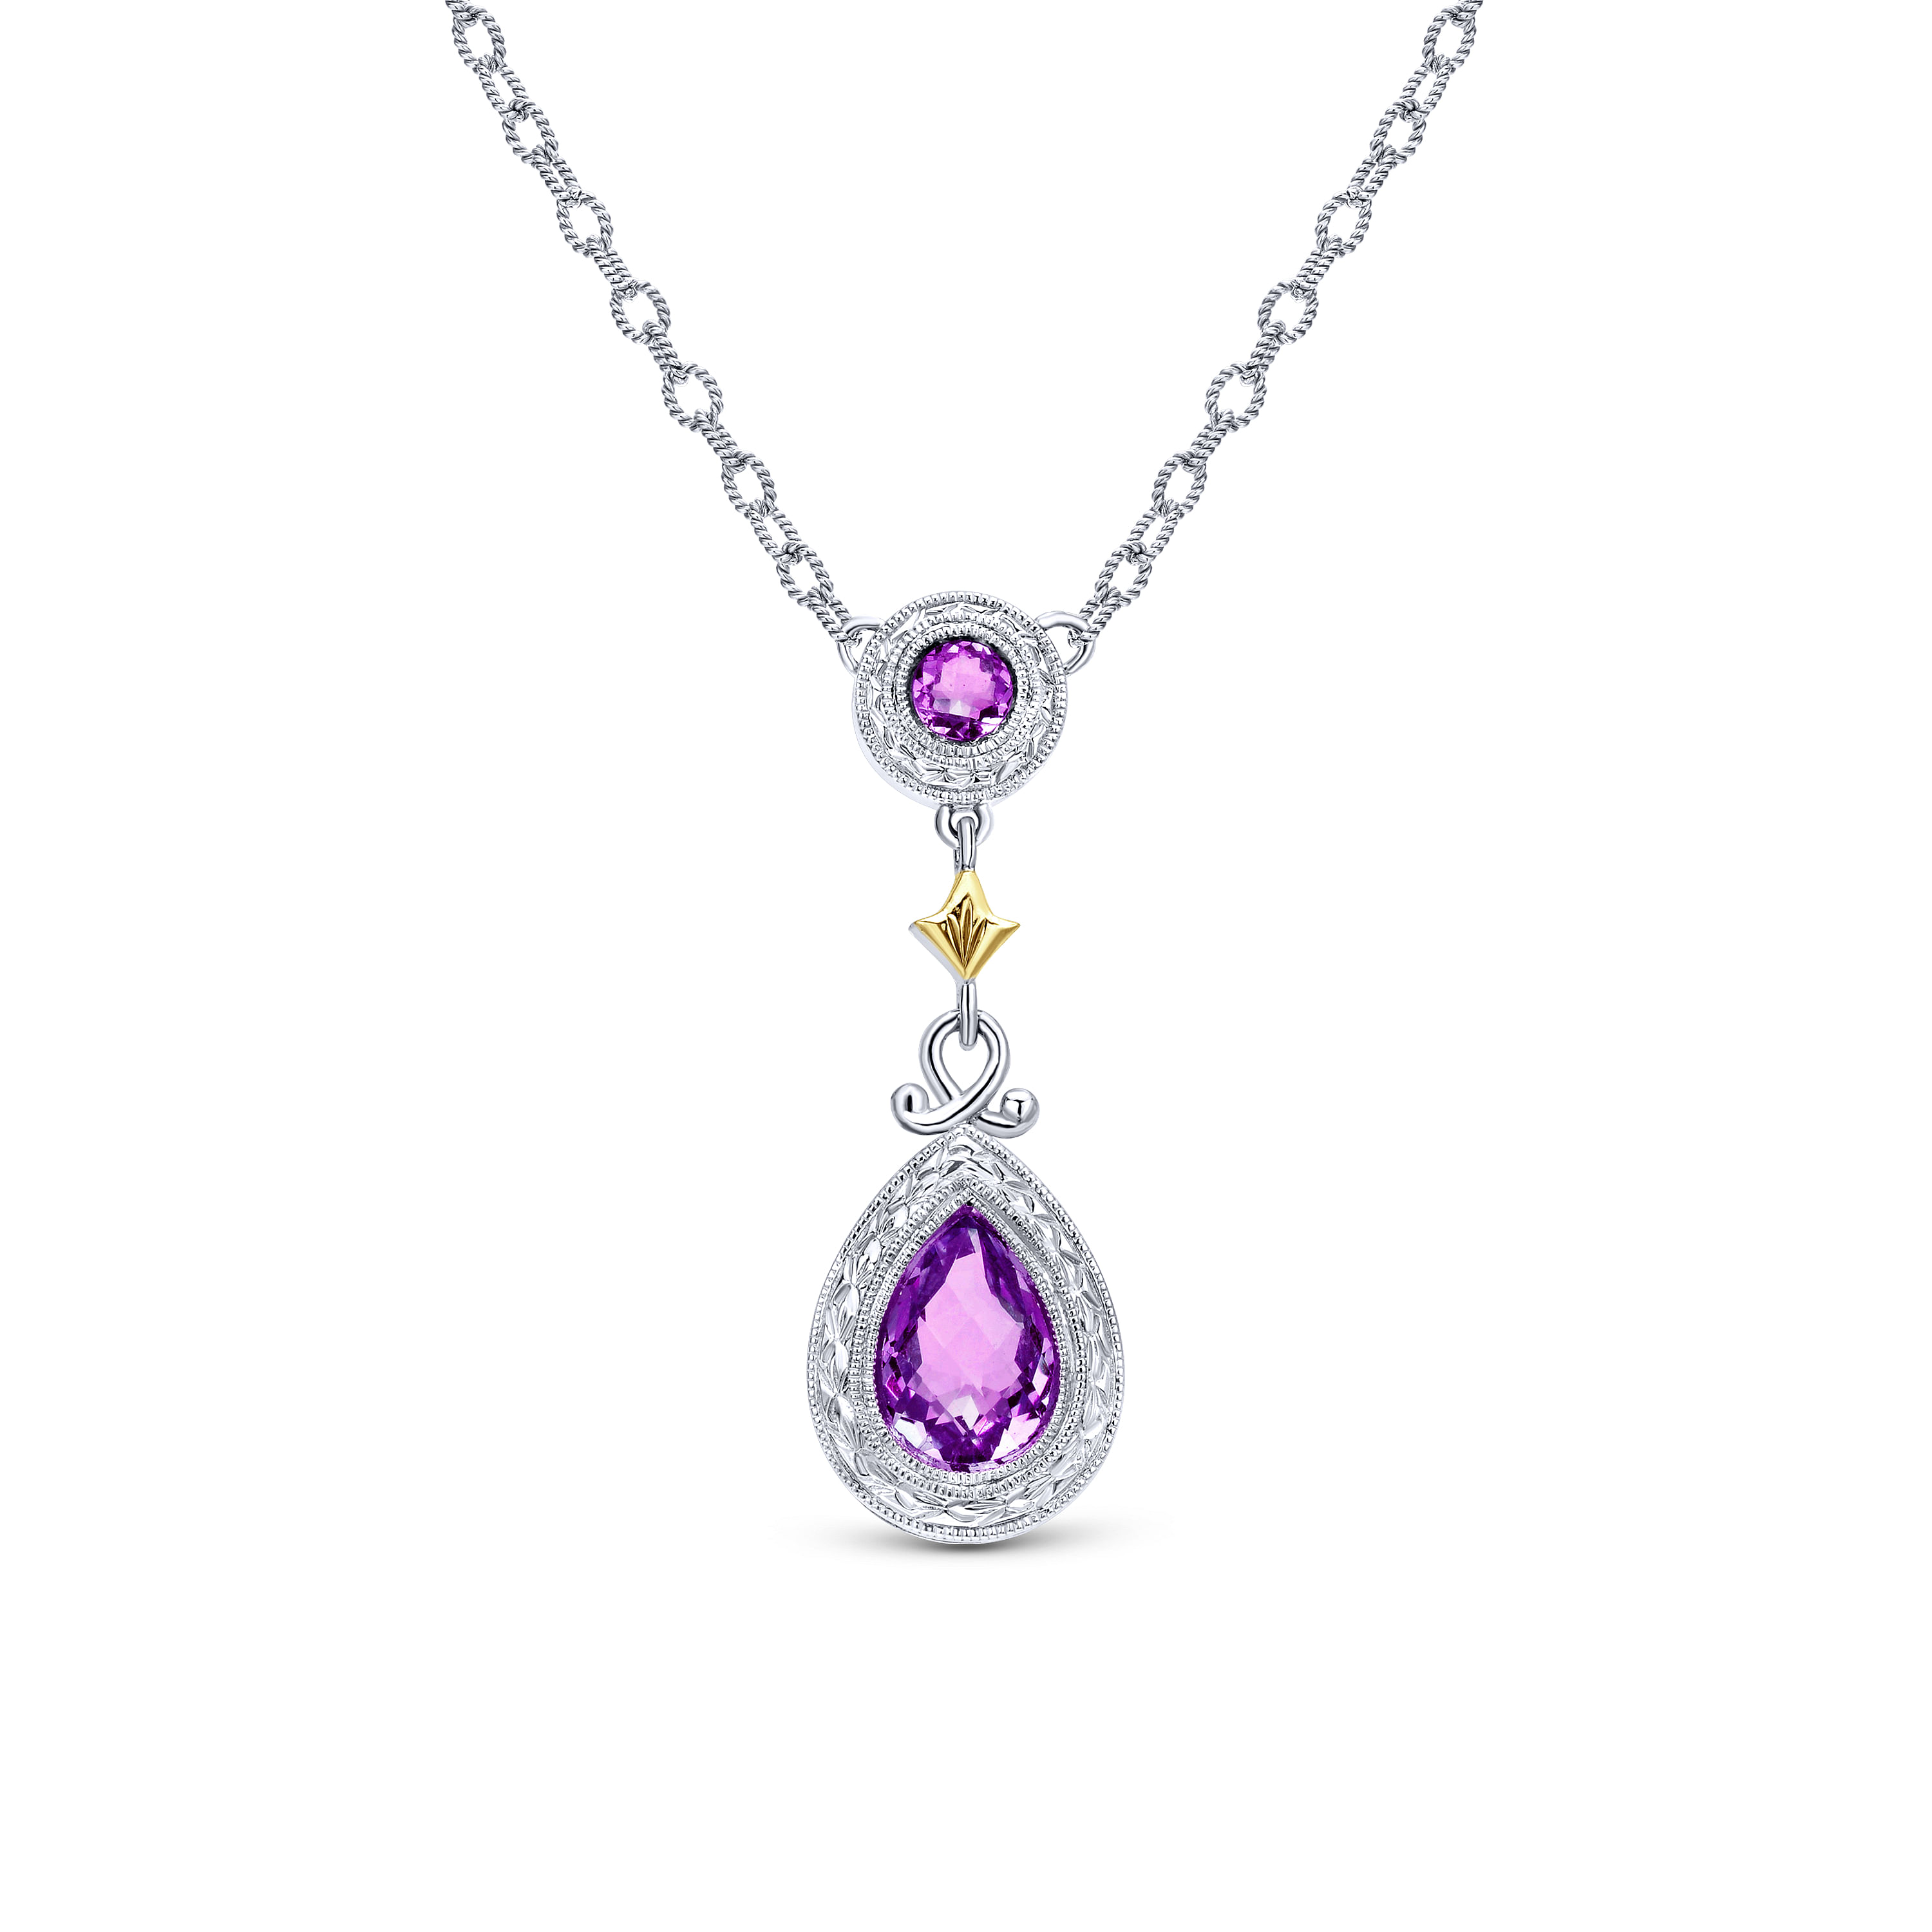 18 inch 925 Sterling Silver and 18K Yellow Gold Amethyst Drop Pendant Necklace